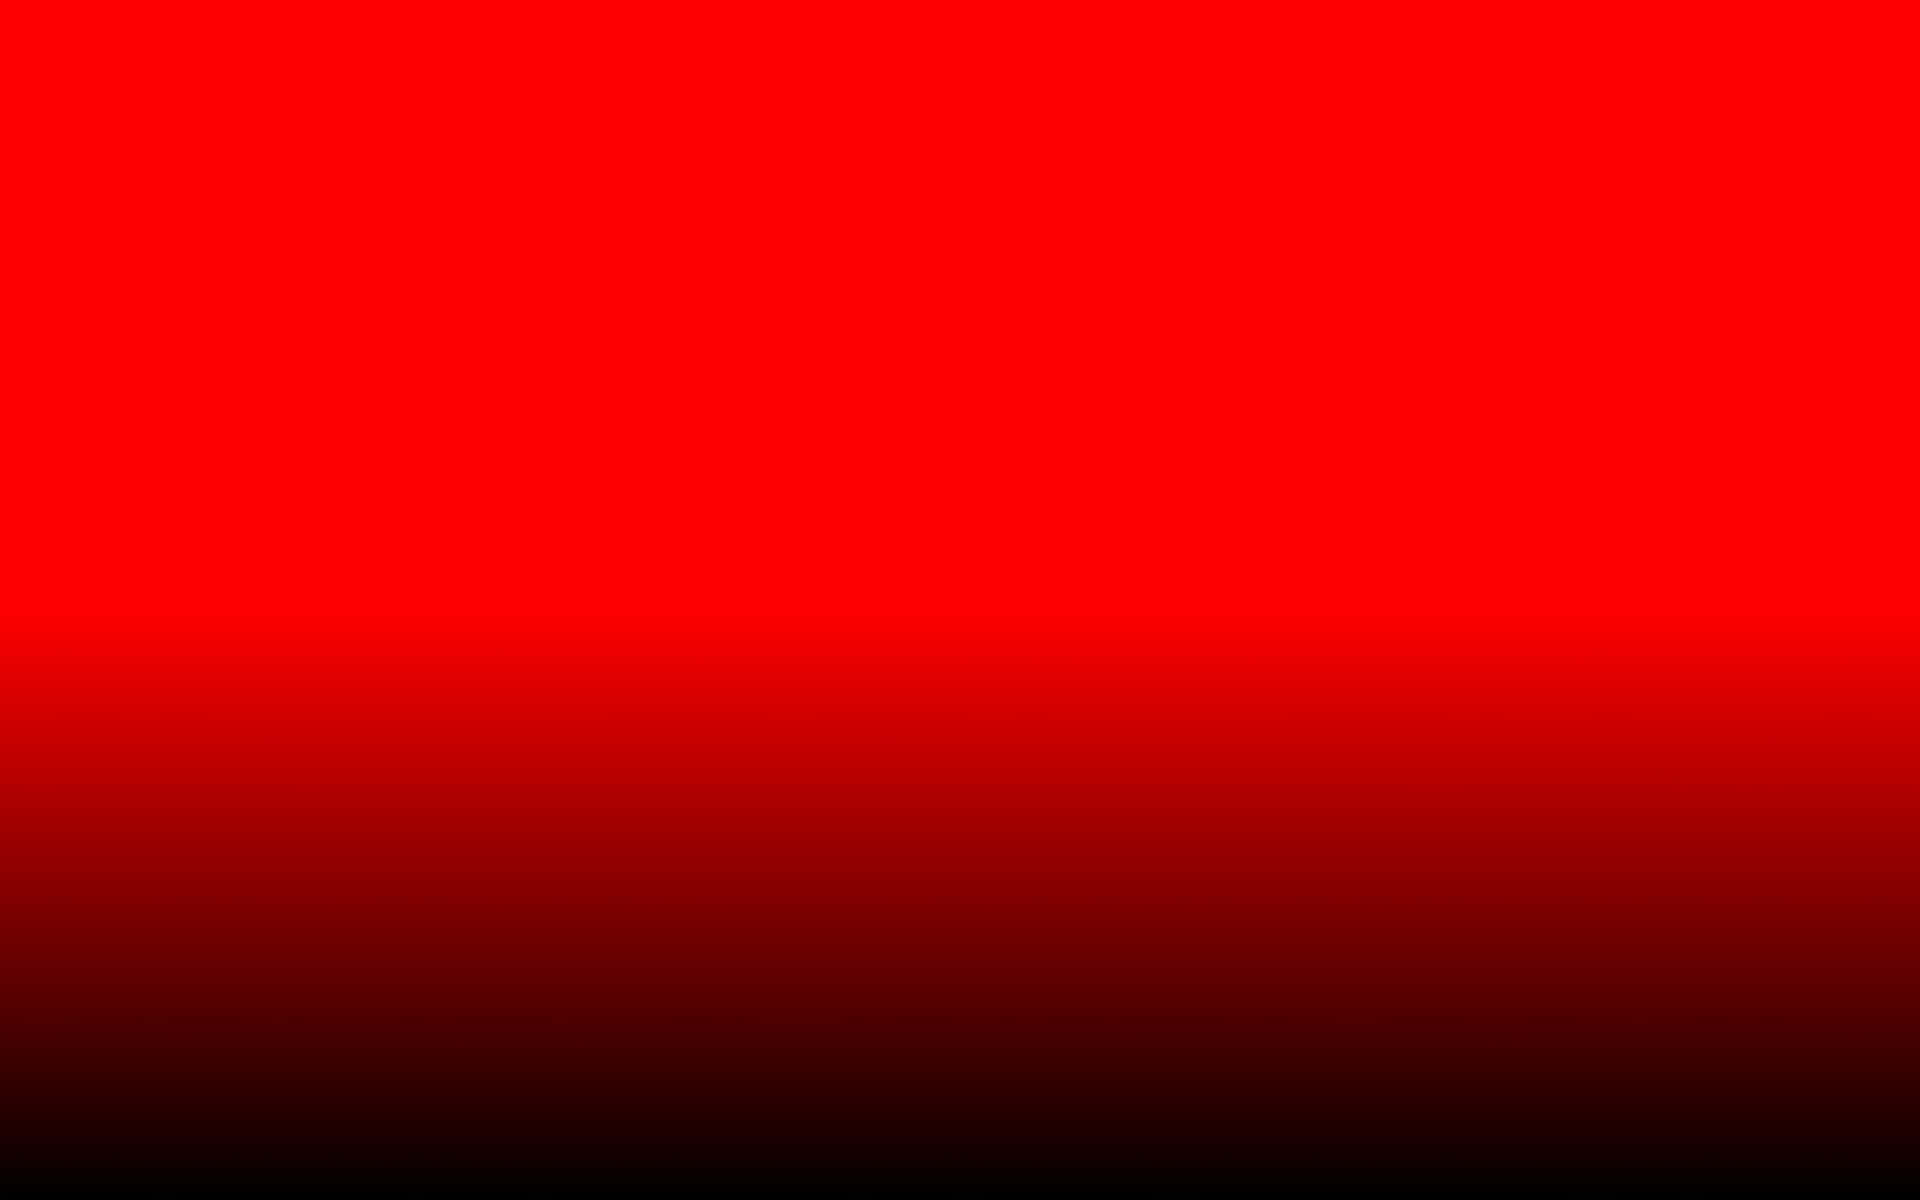 Red And Black Gradient Background